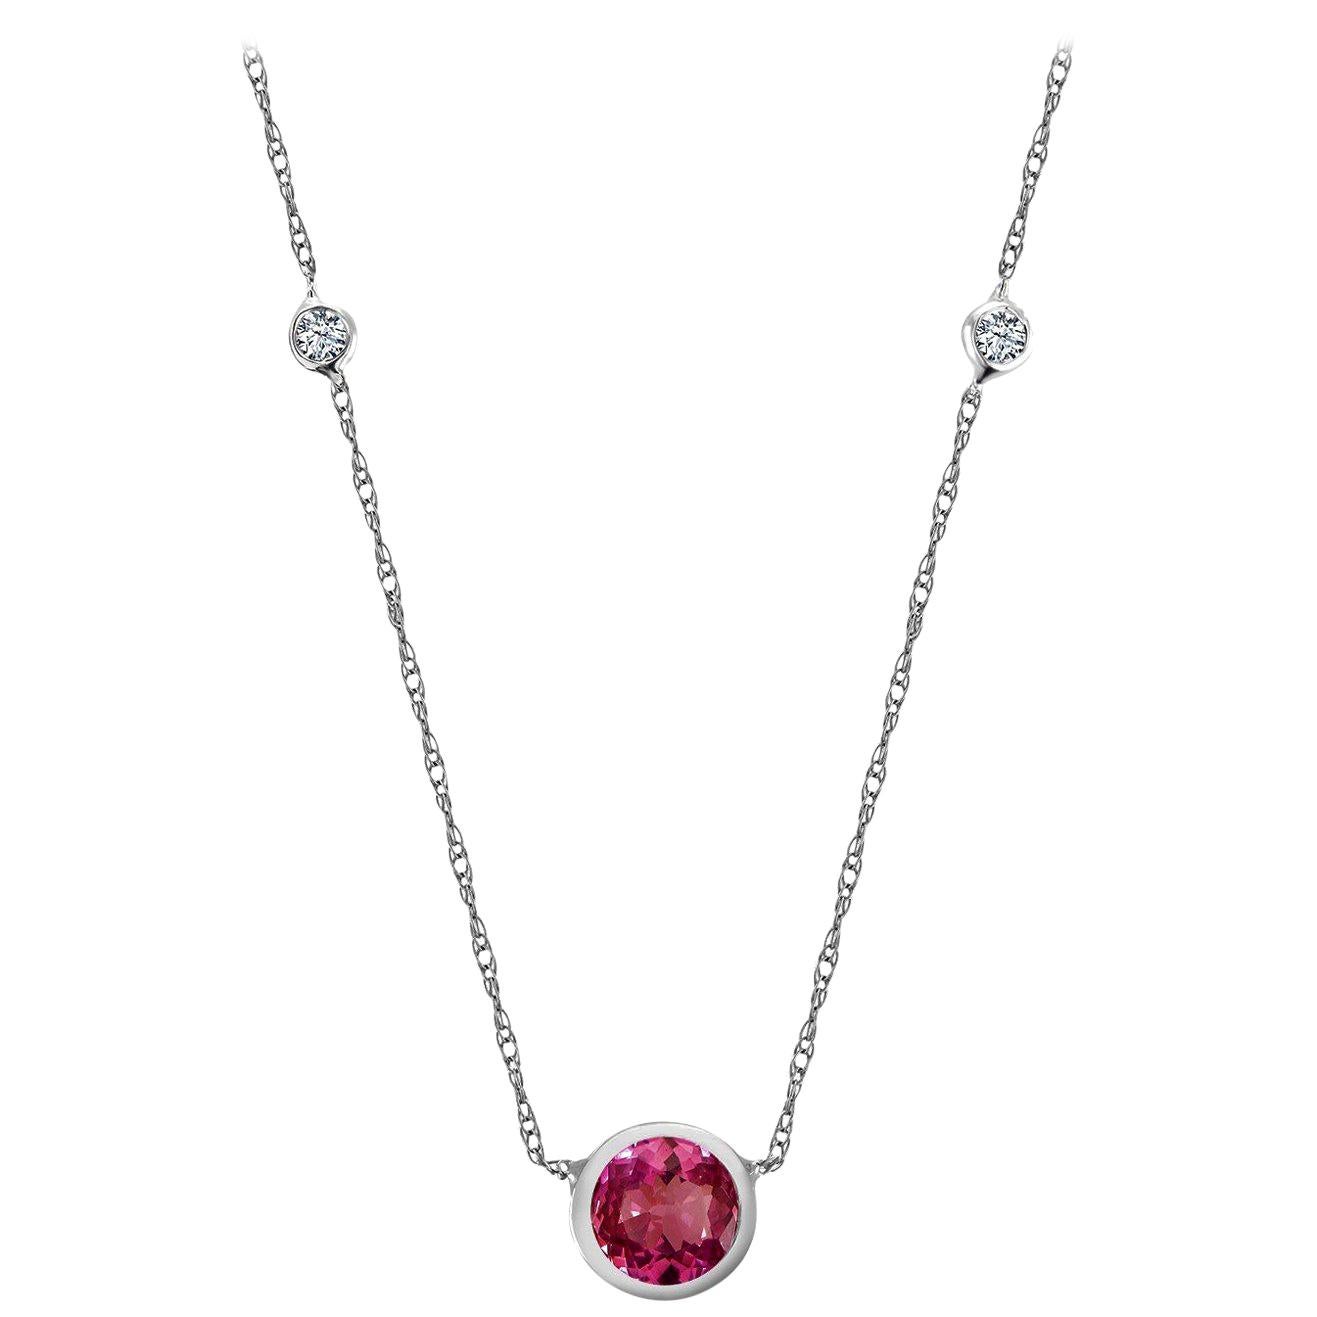 White Gold Pendant Necklace Round Ruby Center and Two Bezel-Set Diamonds